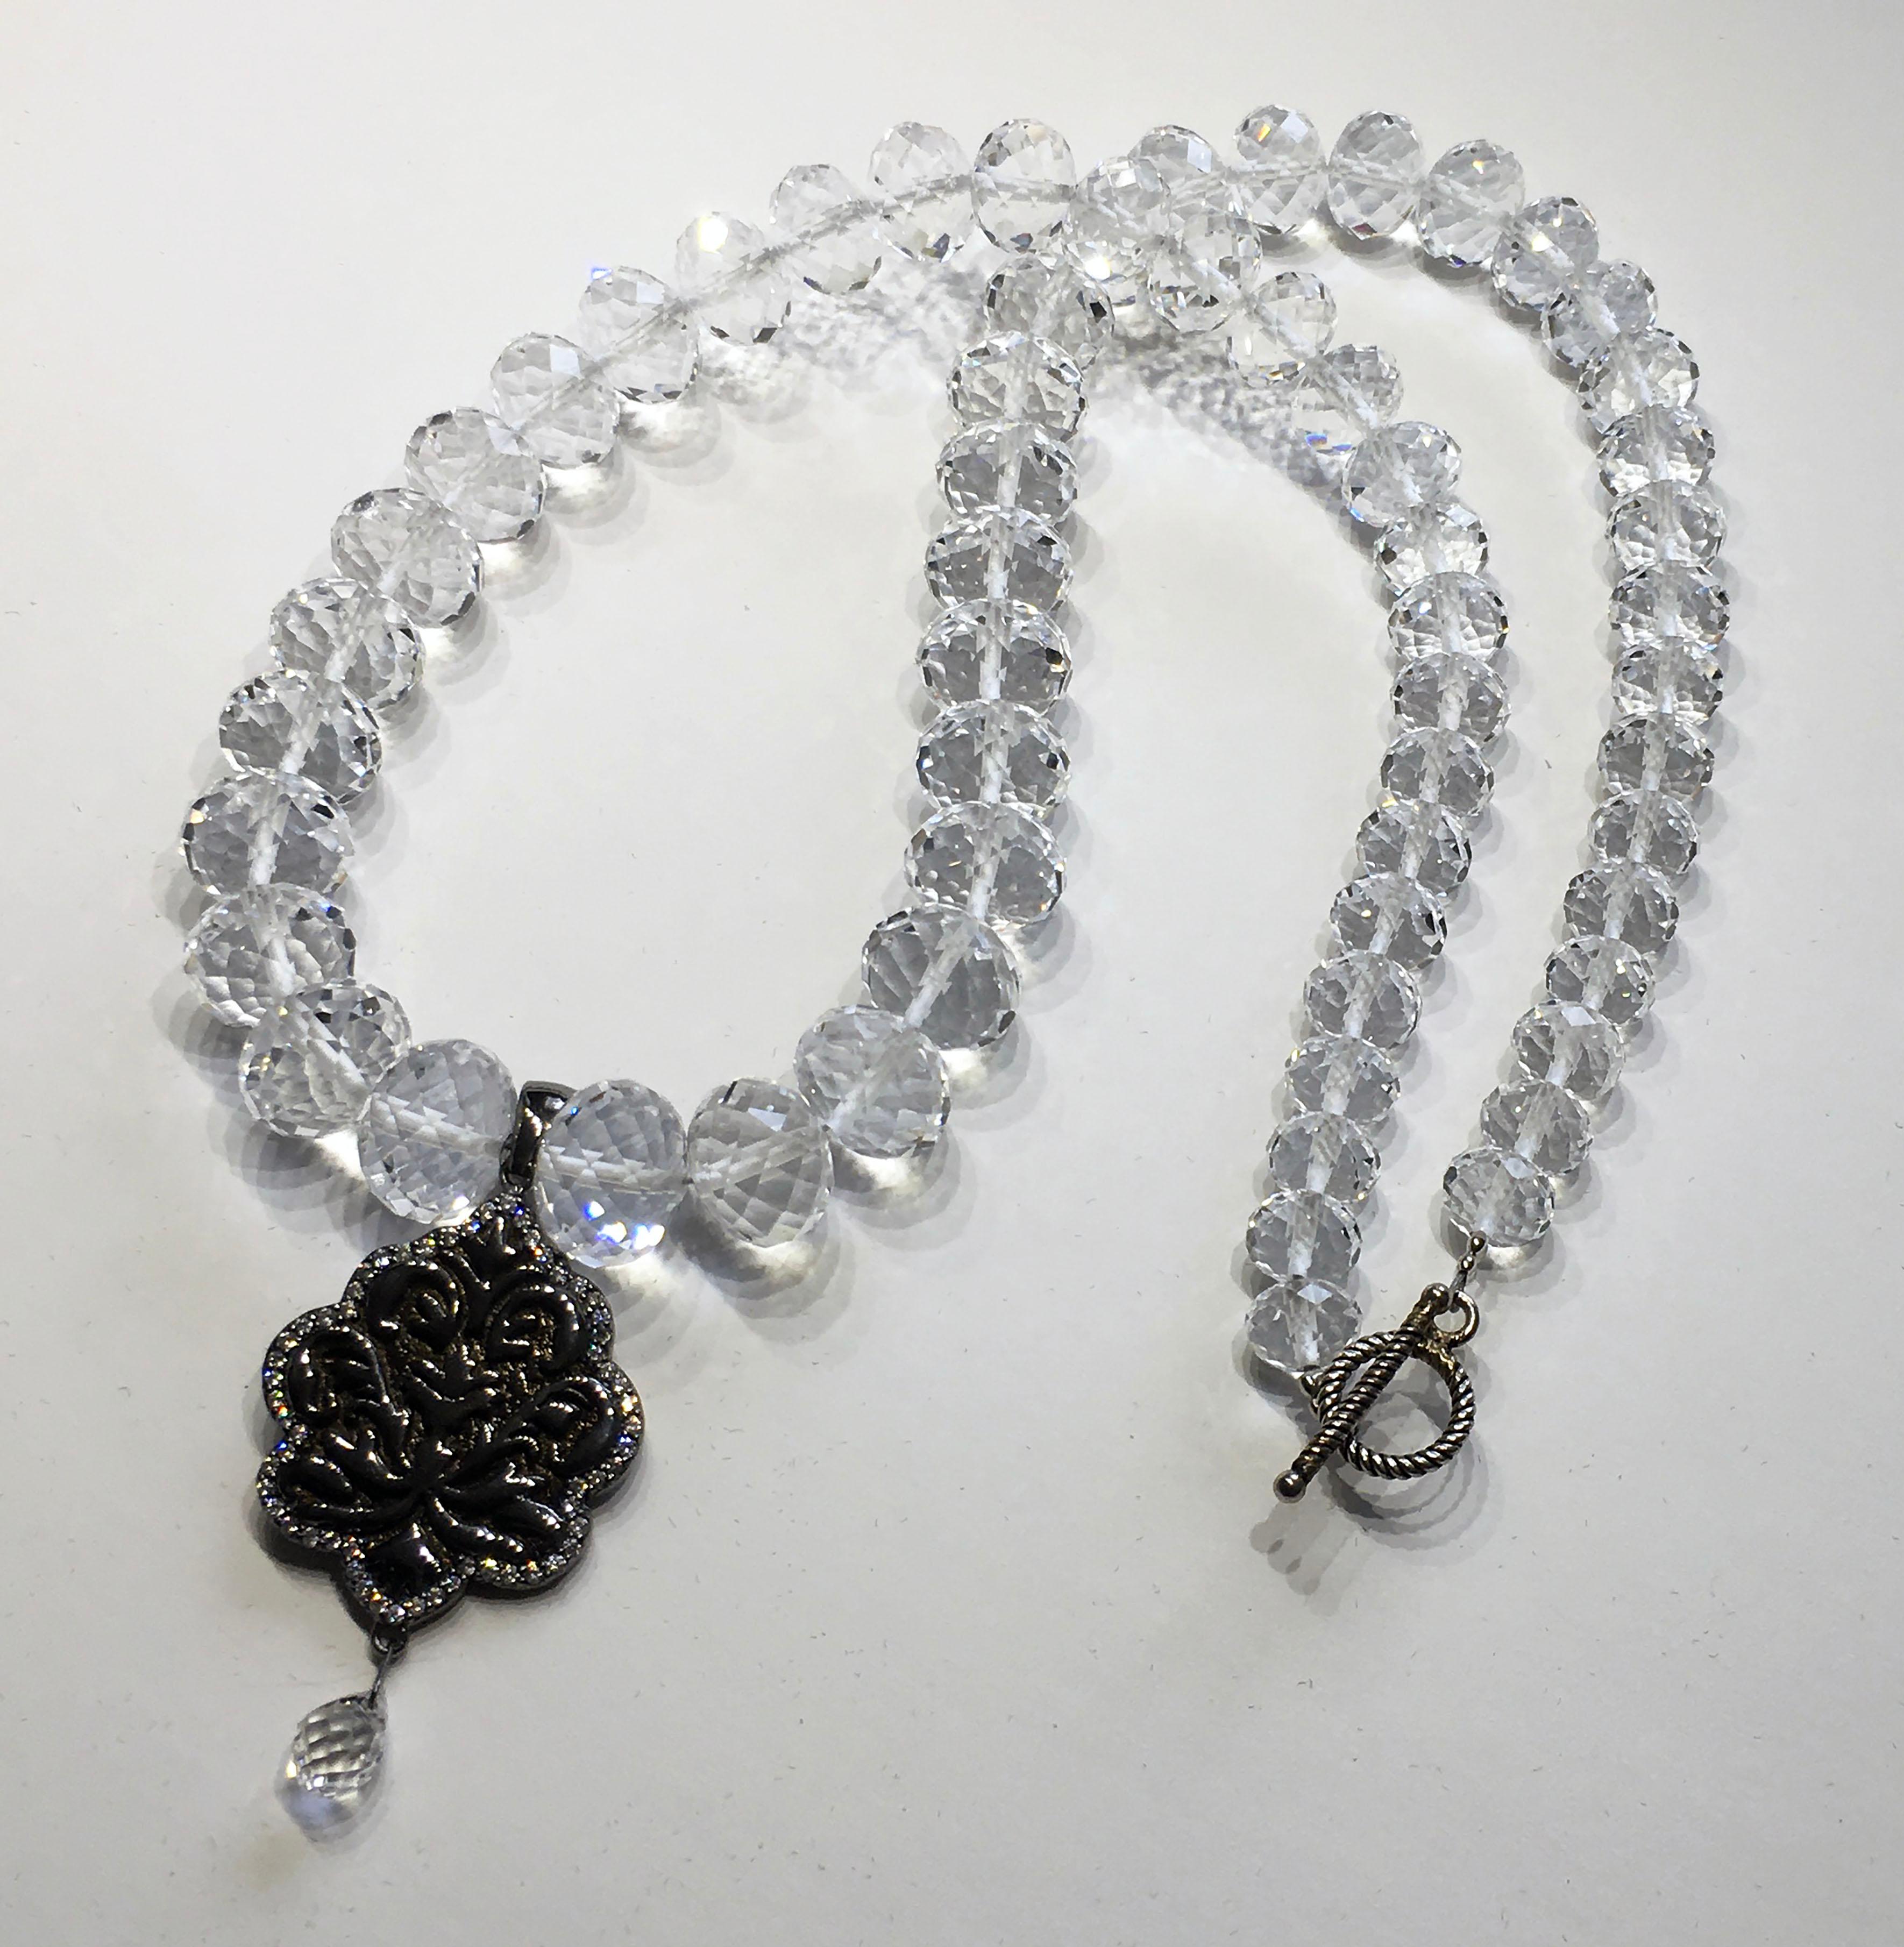 Quartz Beaded Necklace with a Blackened Silver Pendant Set with Sapphires 2